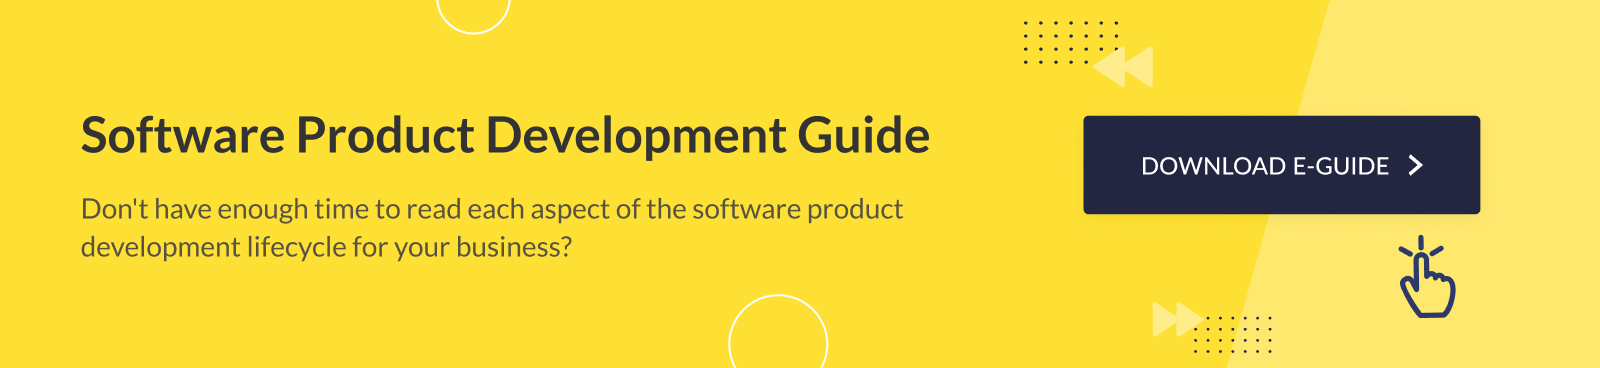 Software Product Development Guide 2